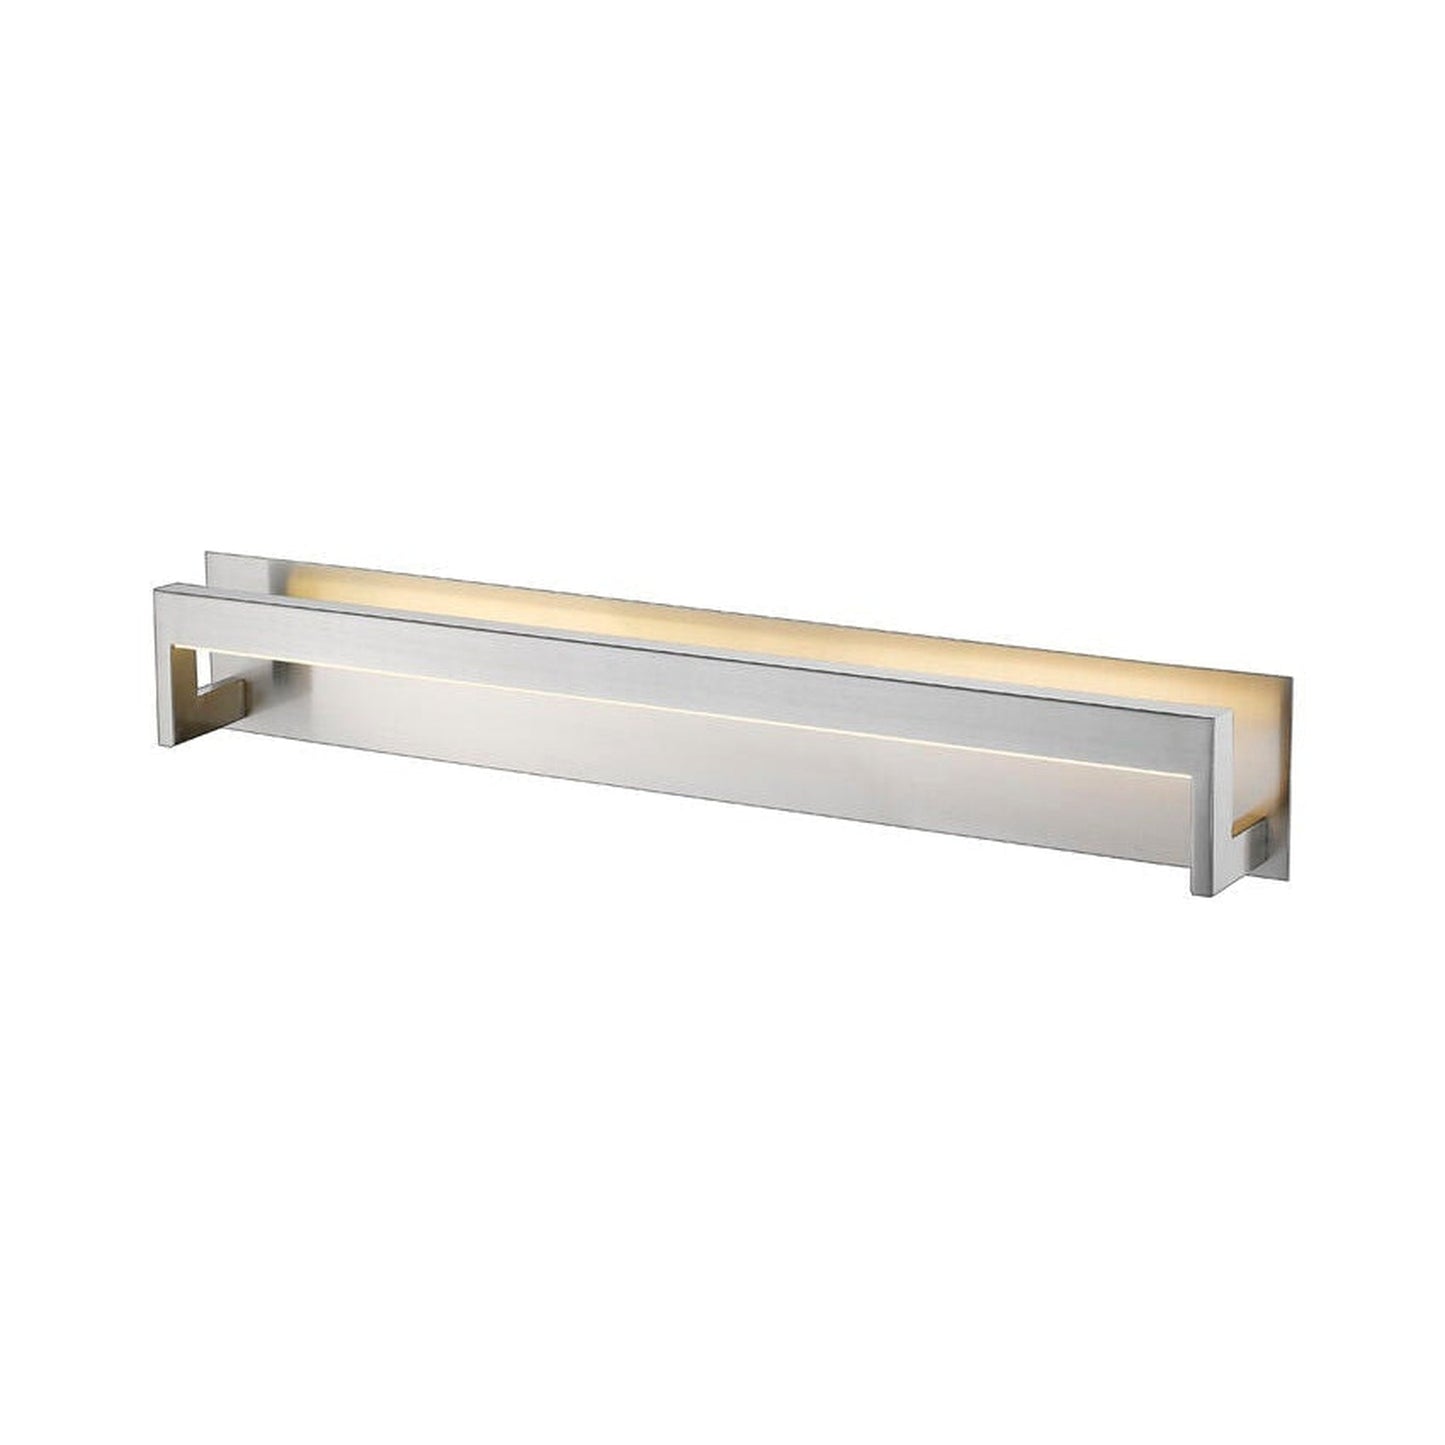 Z-Lite Linc 37" 1-Light LED Brushed Nickel Vanity Light With Frosted Acrylic Shade